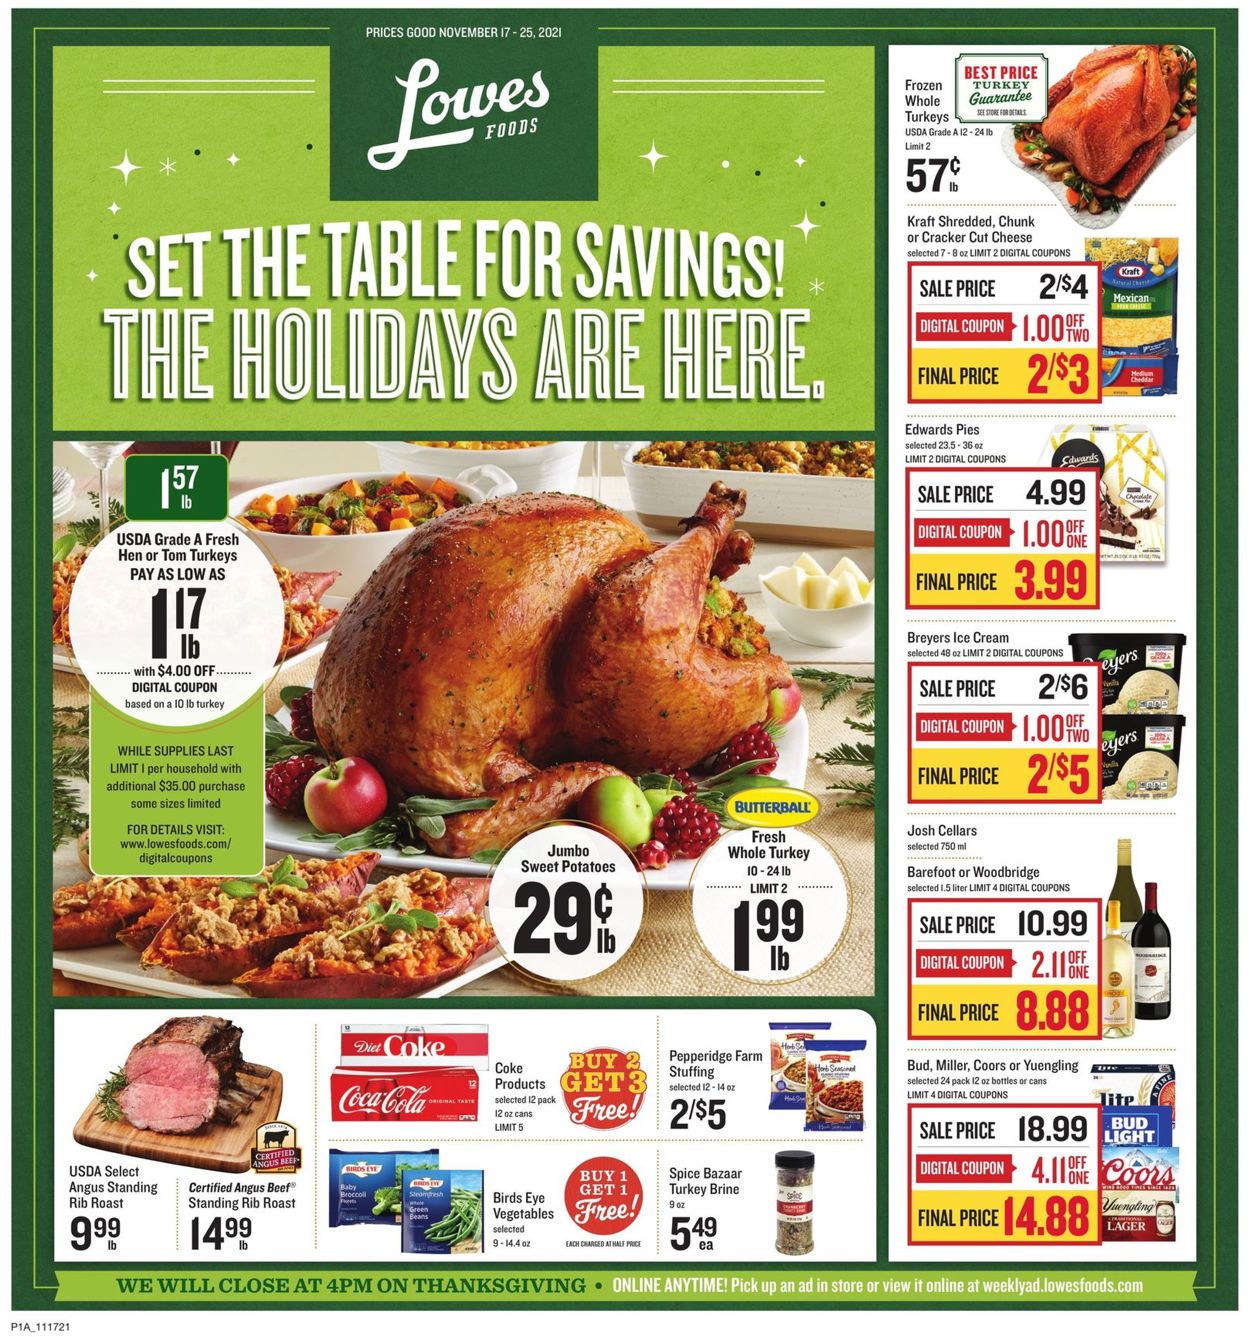 Lowes Foods THANKSGIVING 2021 Weekly Ad Circular - valid 11/17-11/25/2021